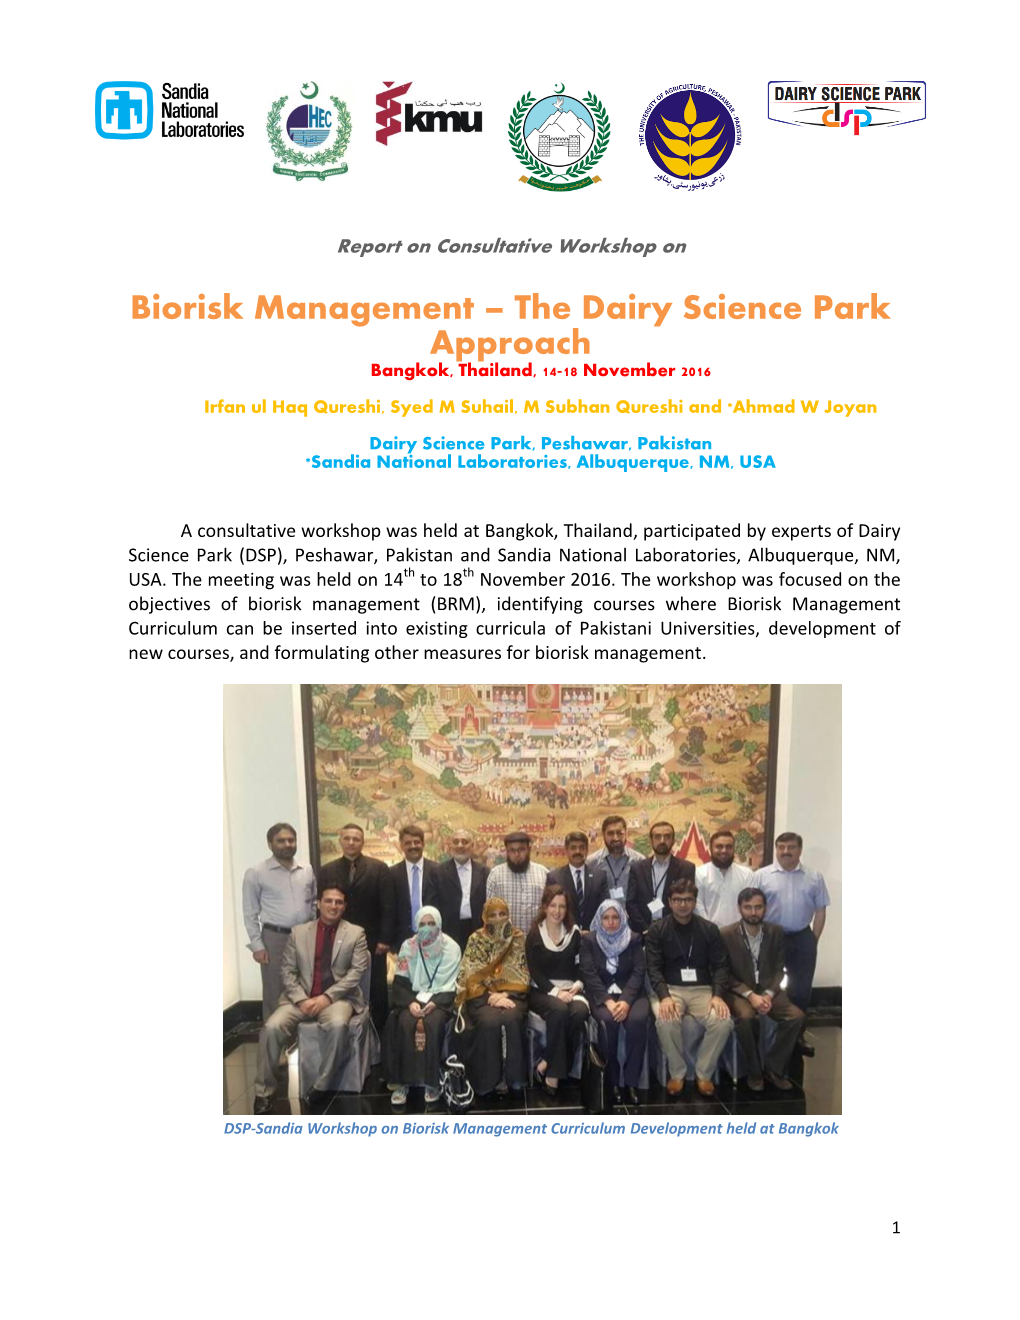 Biorisk Management the Dairy Science Park Approach